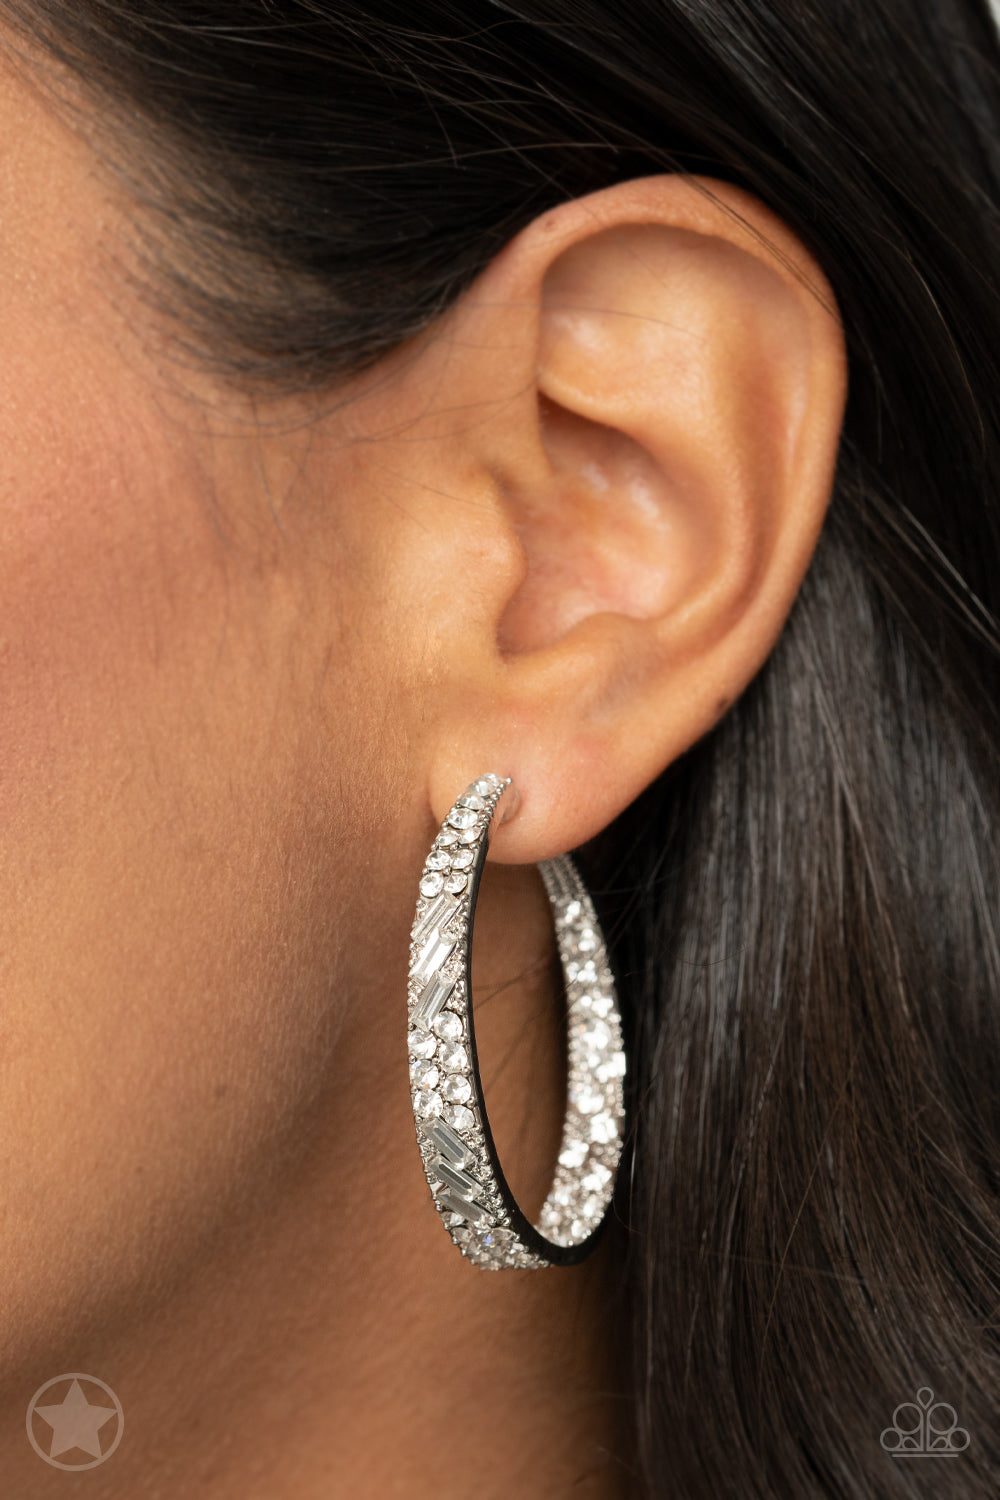 GLITZY By Association - Silver Hoop Earrings - Paparazzi Accessories - Chunky silver hoop is dipped in brilliantly sparkling rhinestones while light-catching texture wraps around the back. The interior of the hoop features the opposite pattern, creating the illusion of a full hoop of blinding rhinestones.